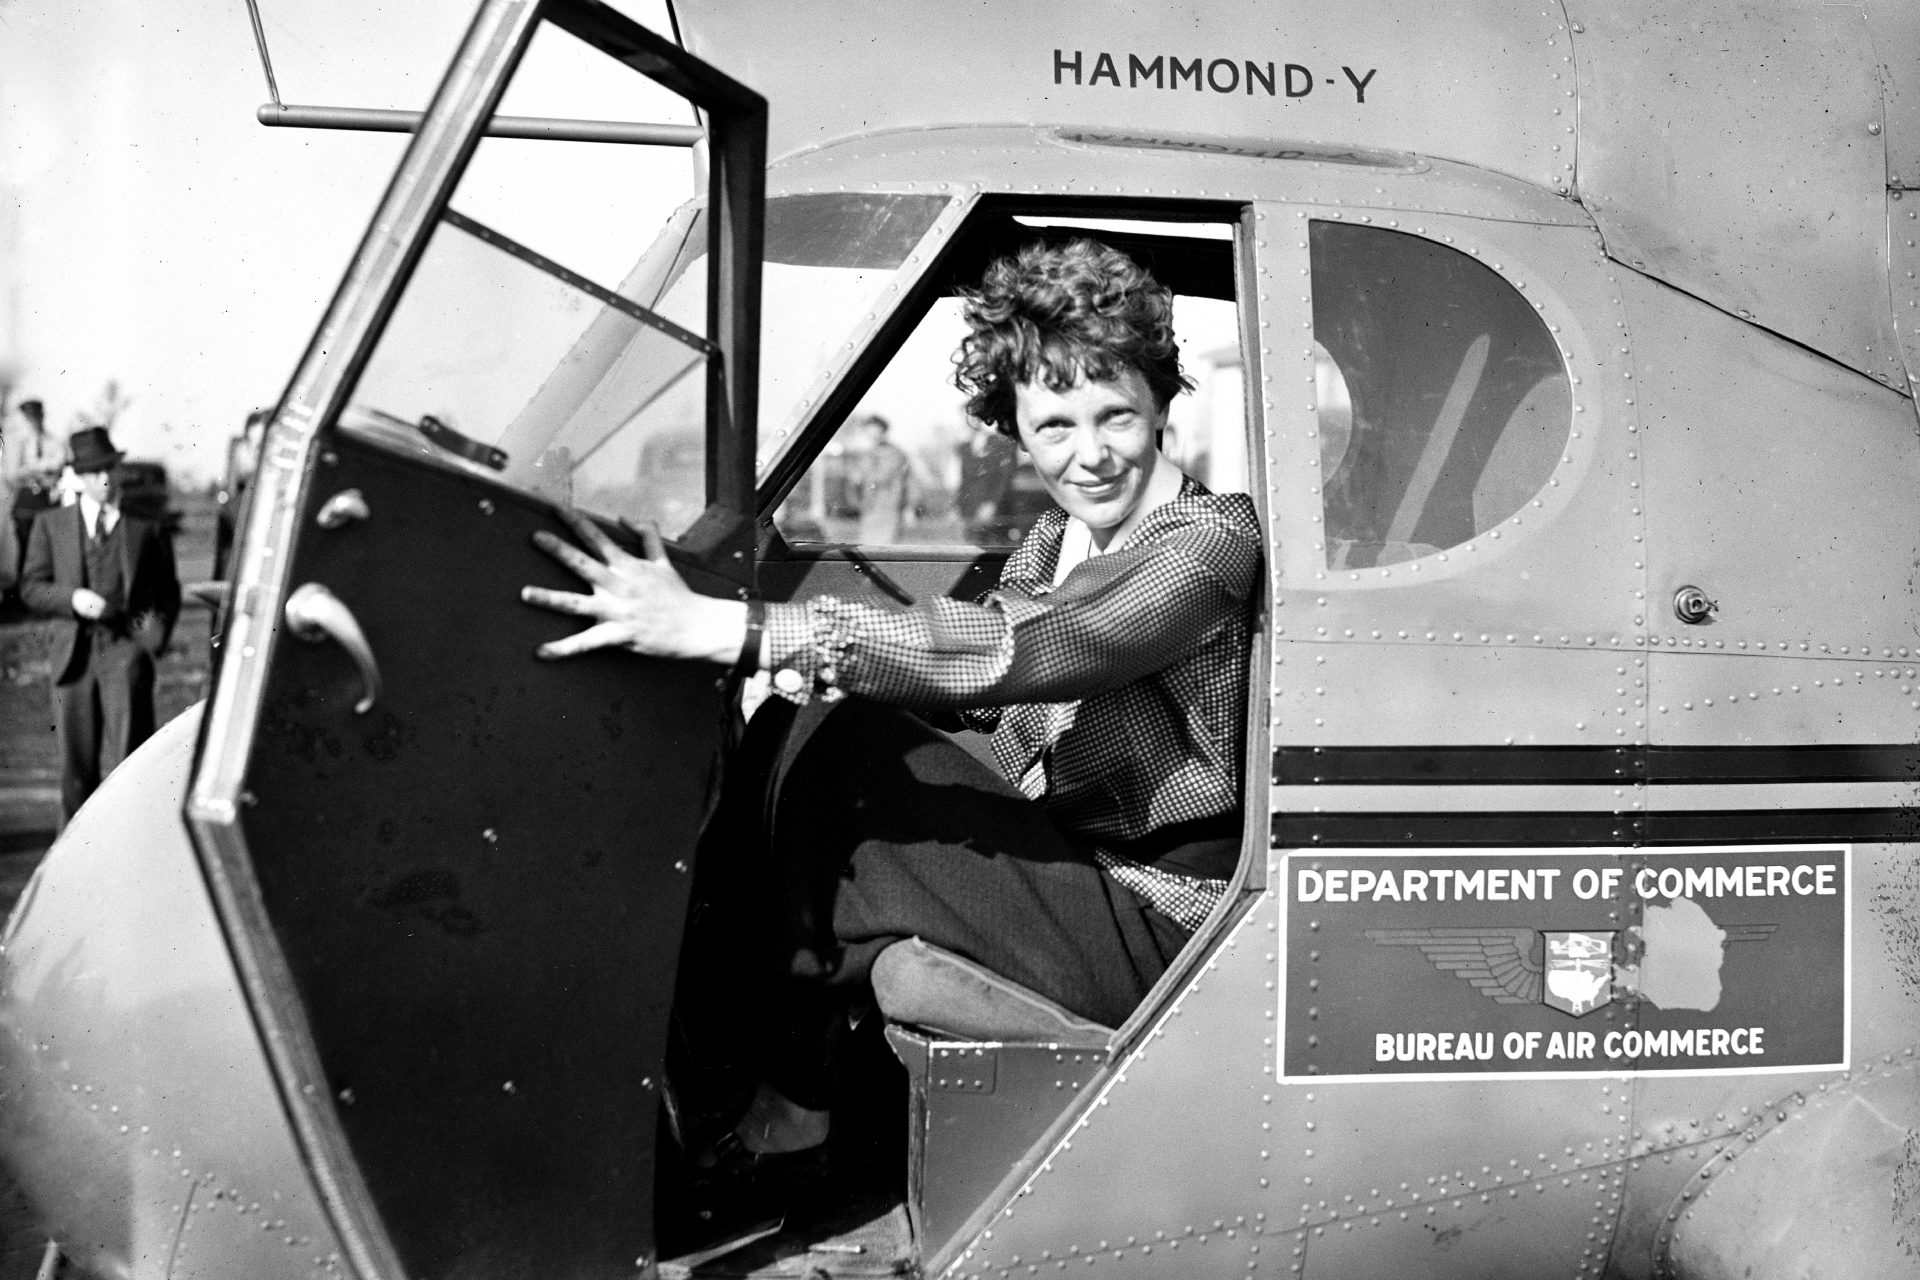 Amelia Earhart: first in many areas